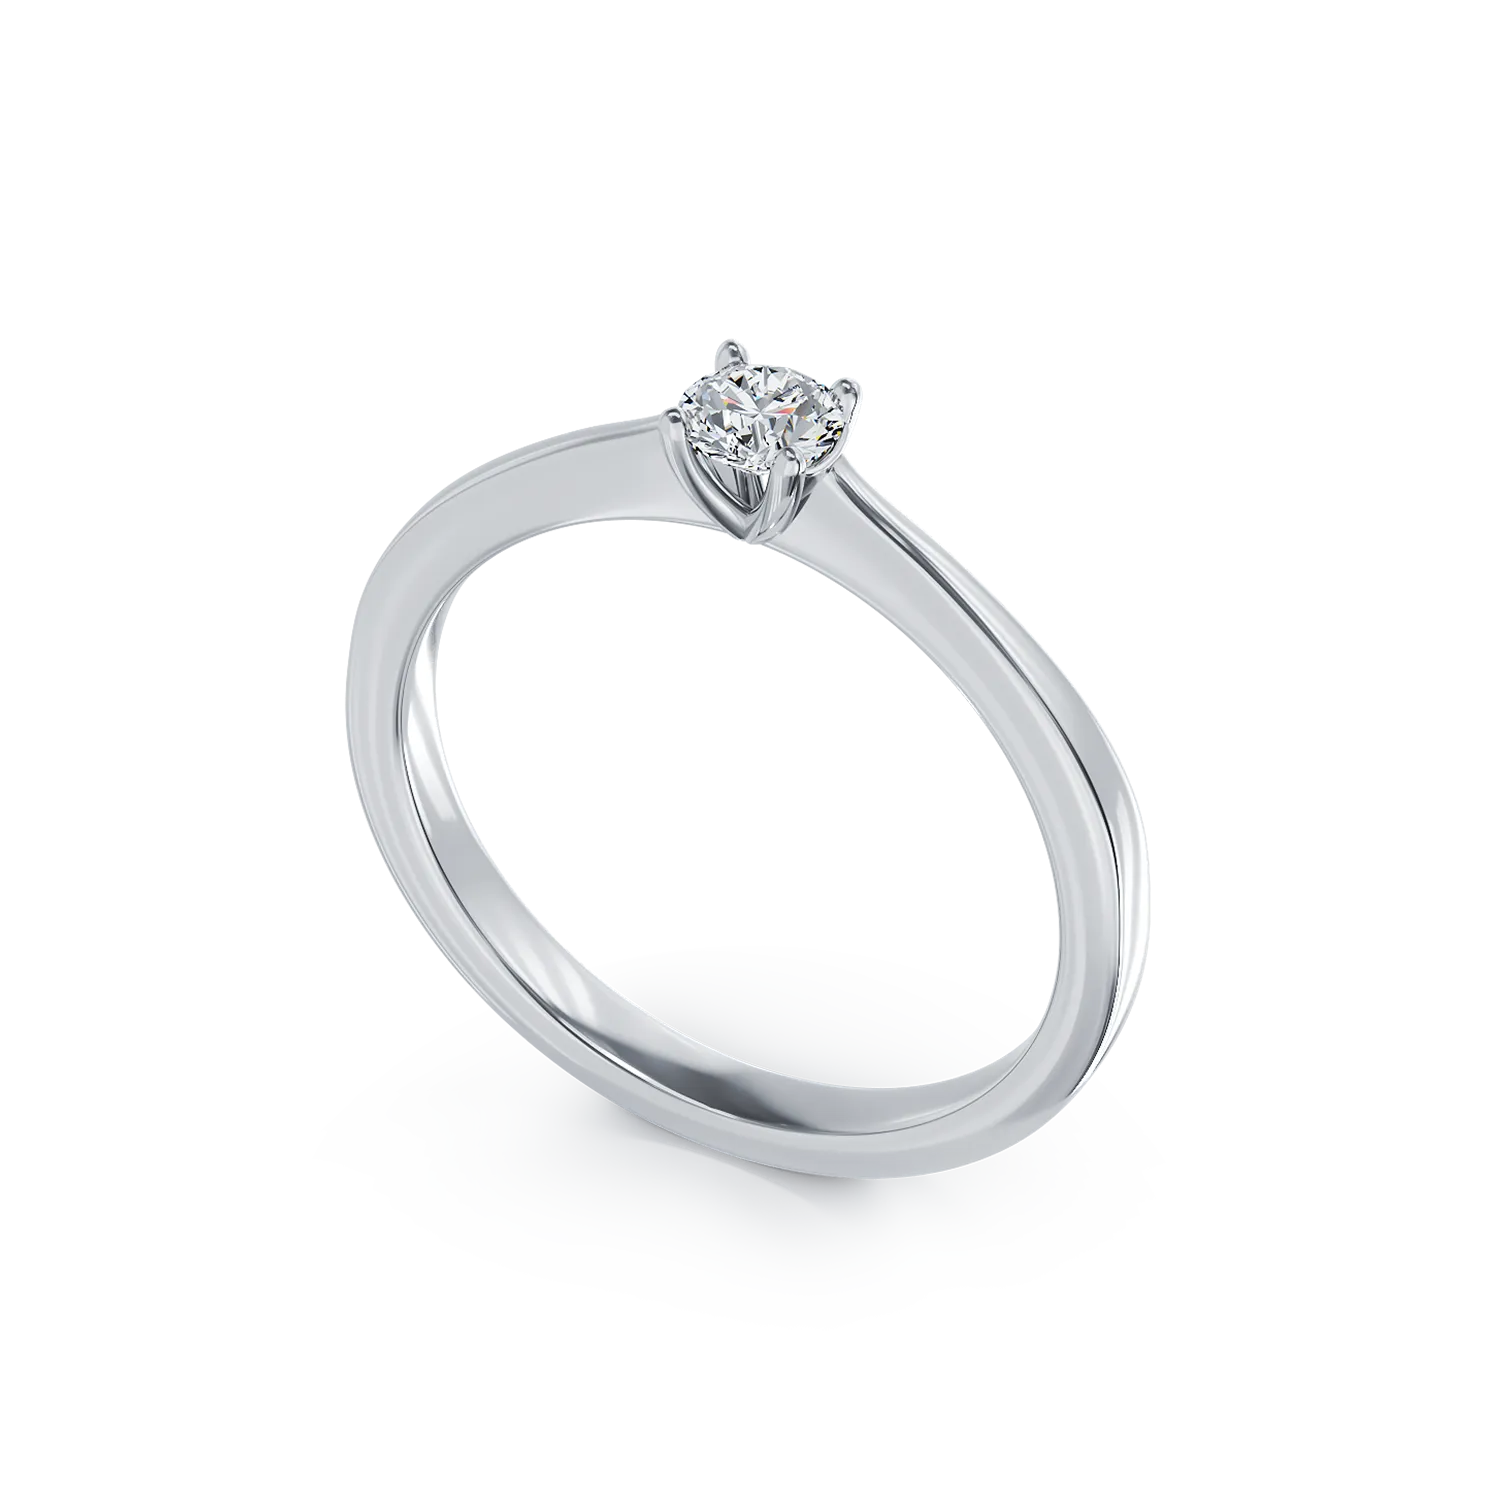 18K white gold engagement ring with 0.205ct diamond